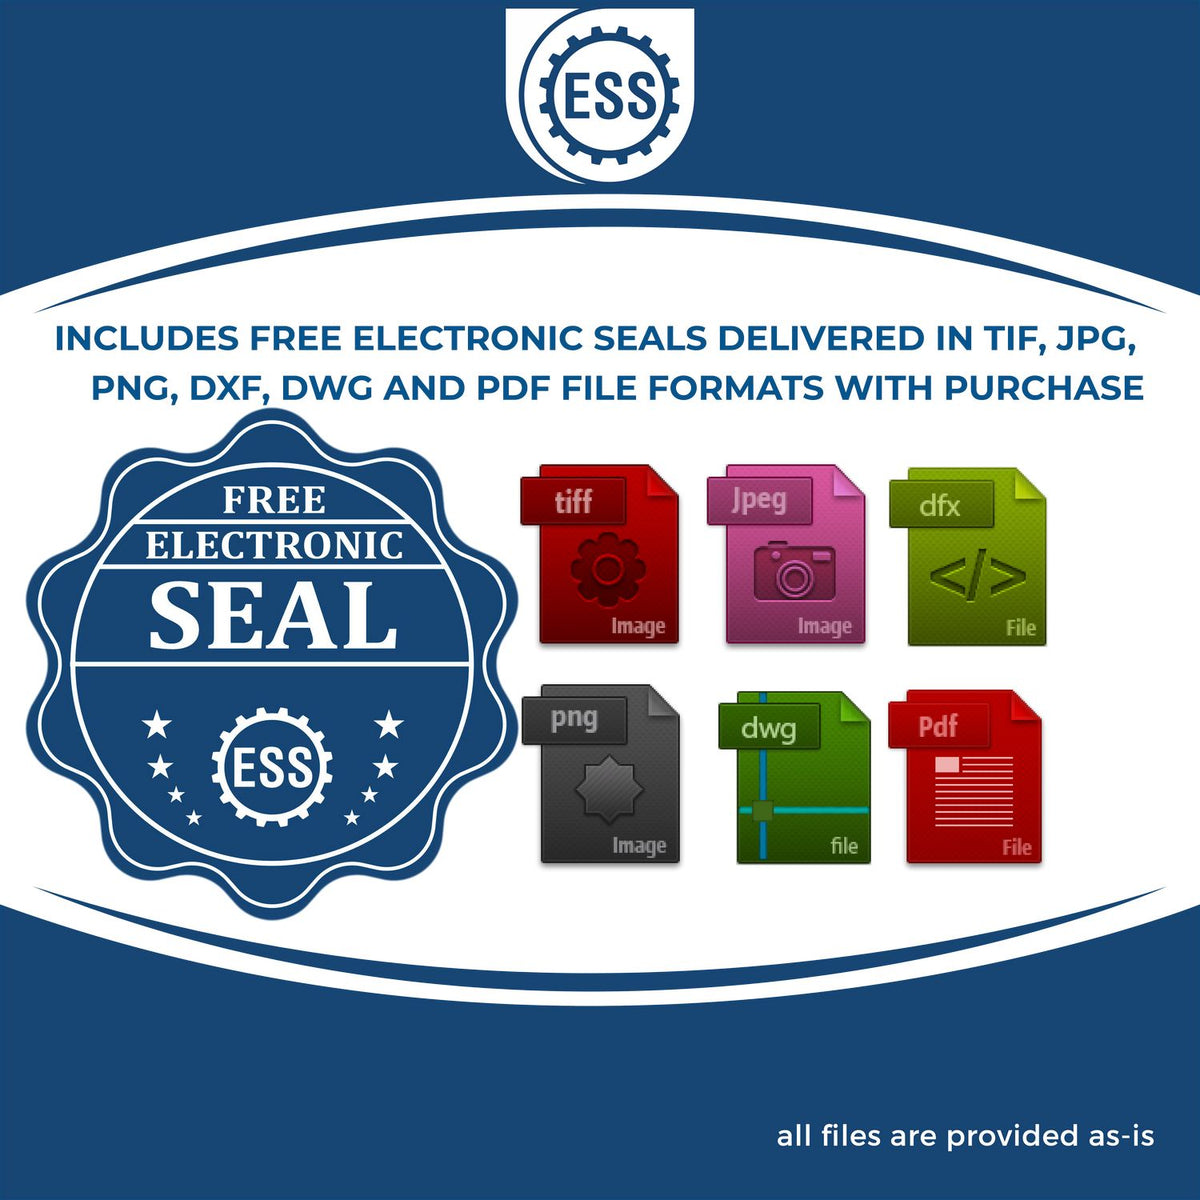 An infographic for the free electronic seal for the Florida Geologist Desk Seal illustrating the different file type icons such as DXF, DWG, TIF, JPG and PNG.